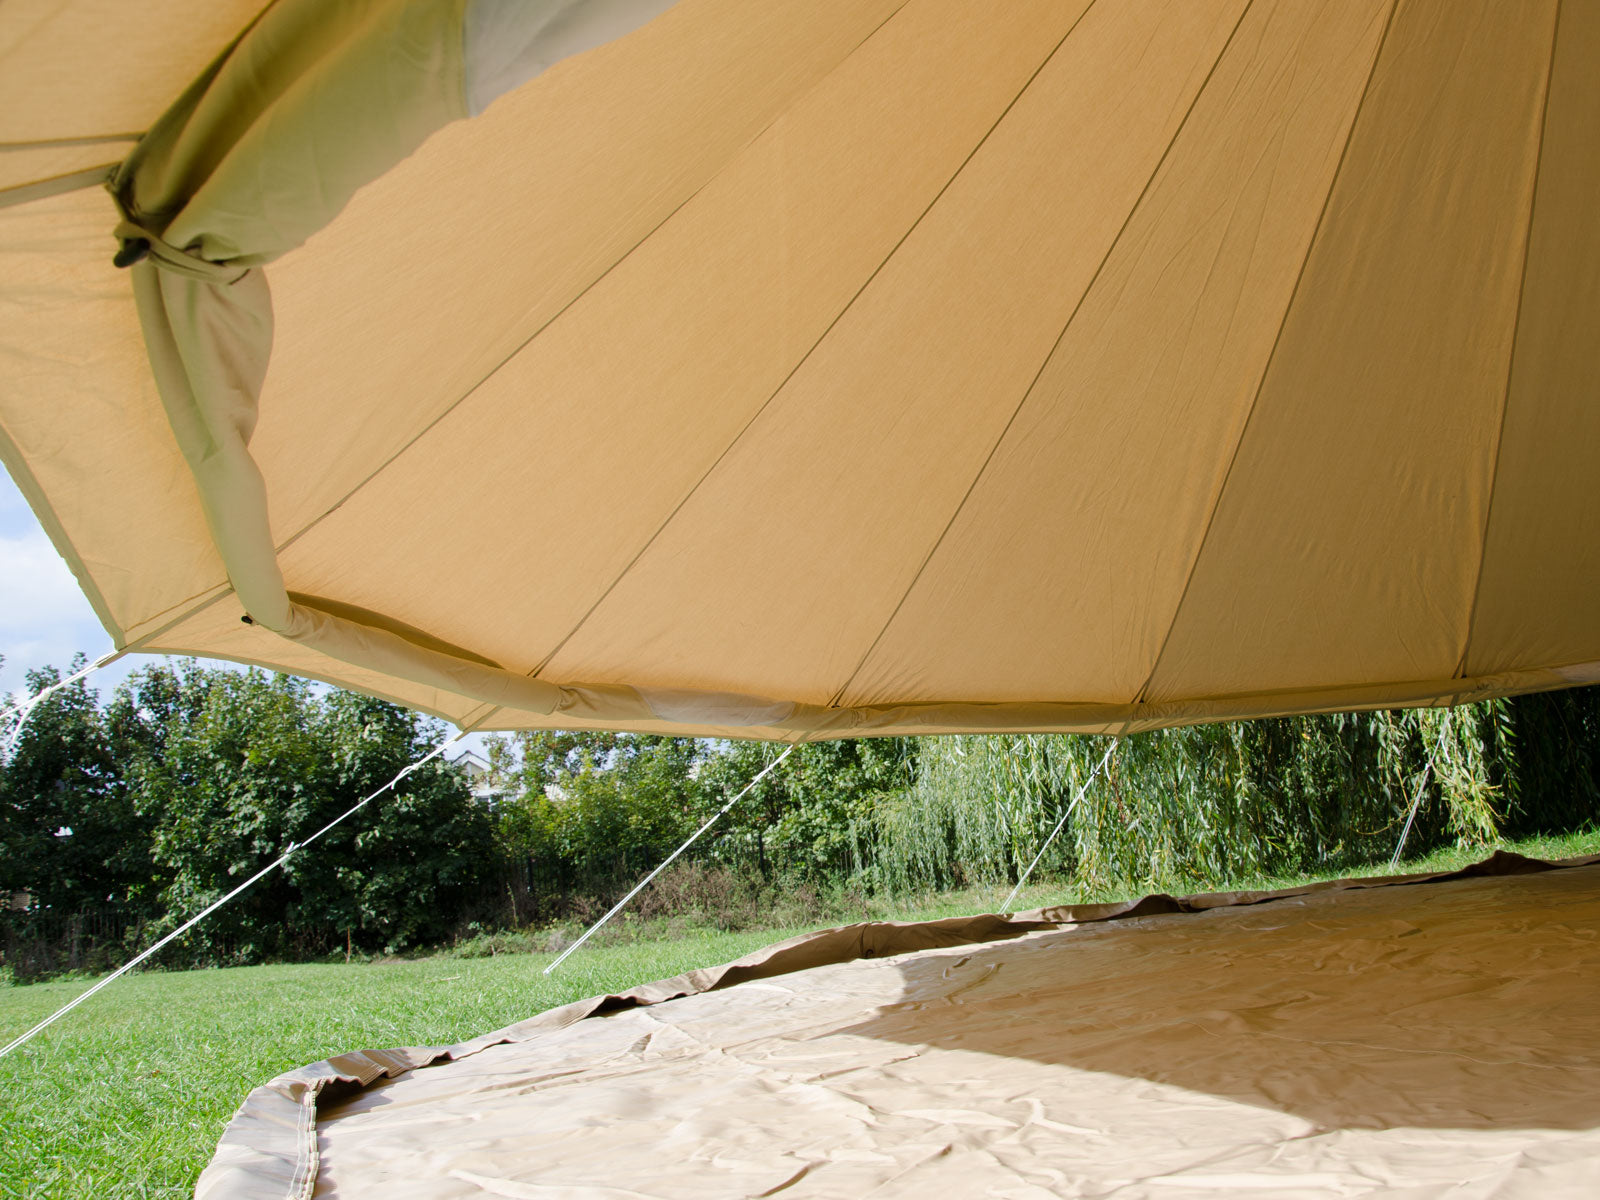 Rolled up walls feature of 5m zig bell tent